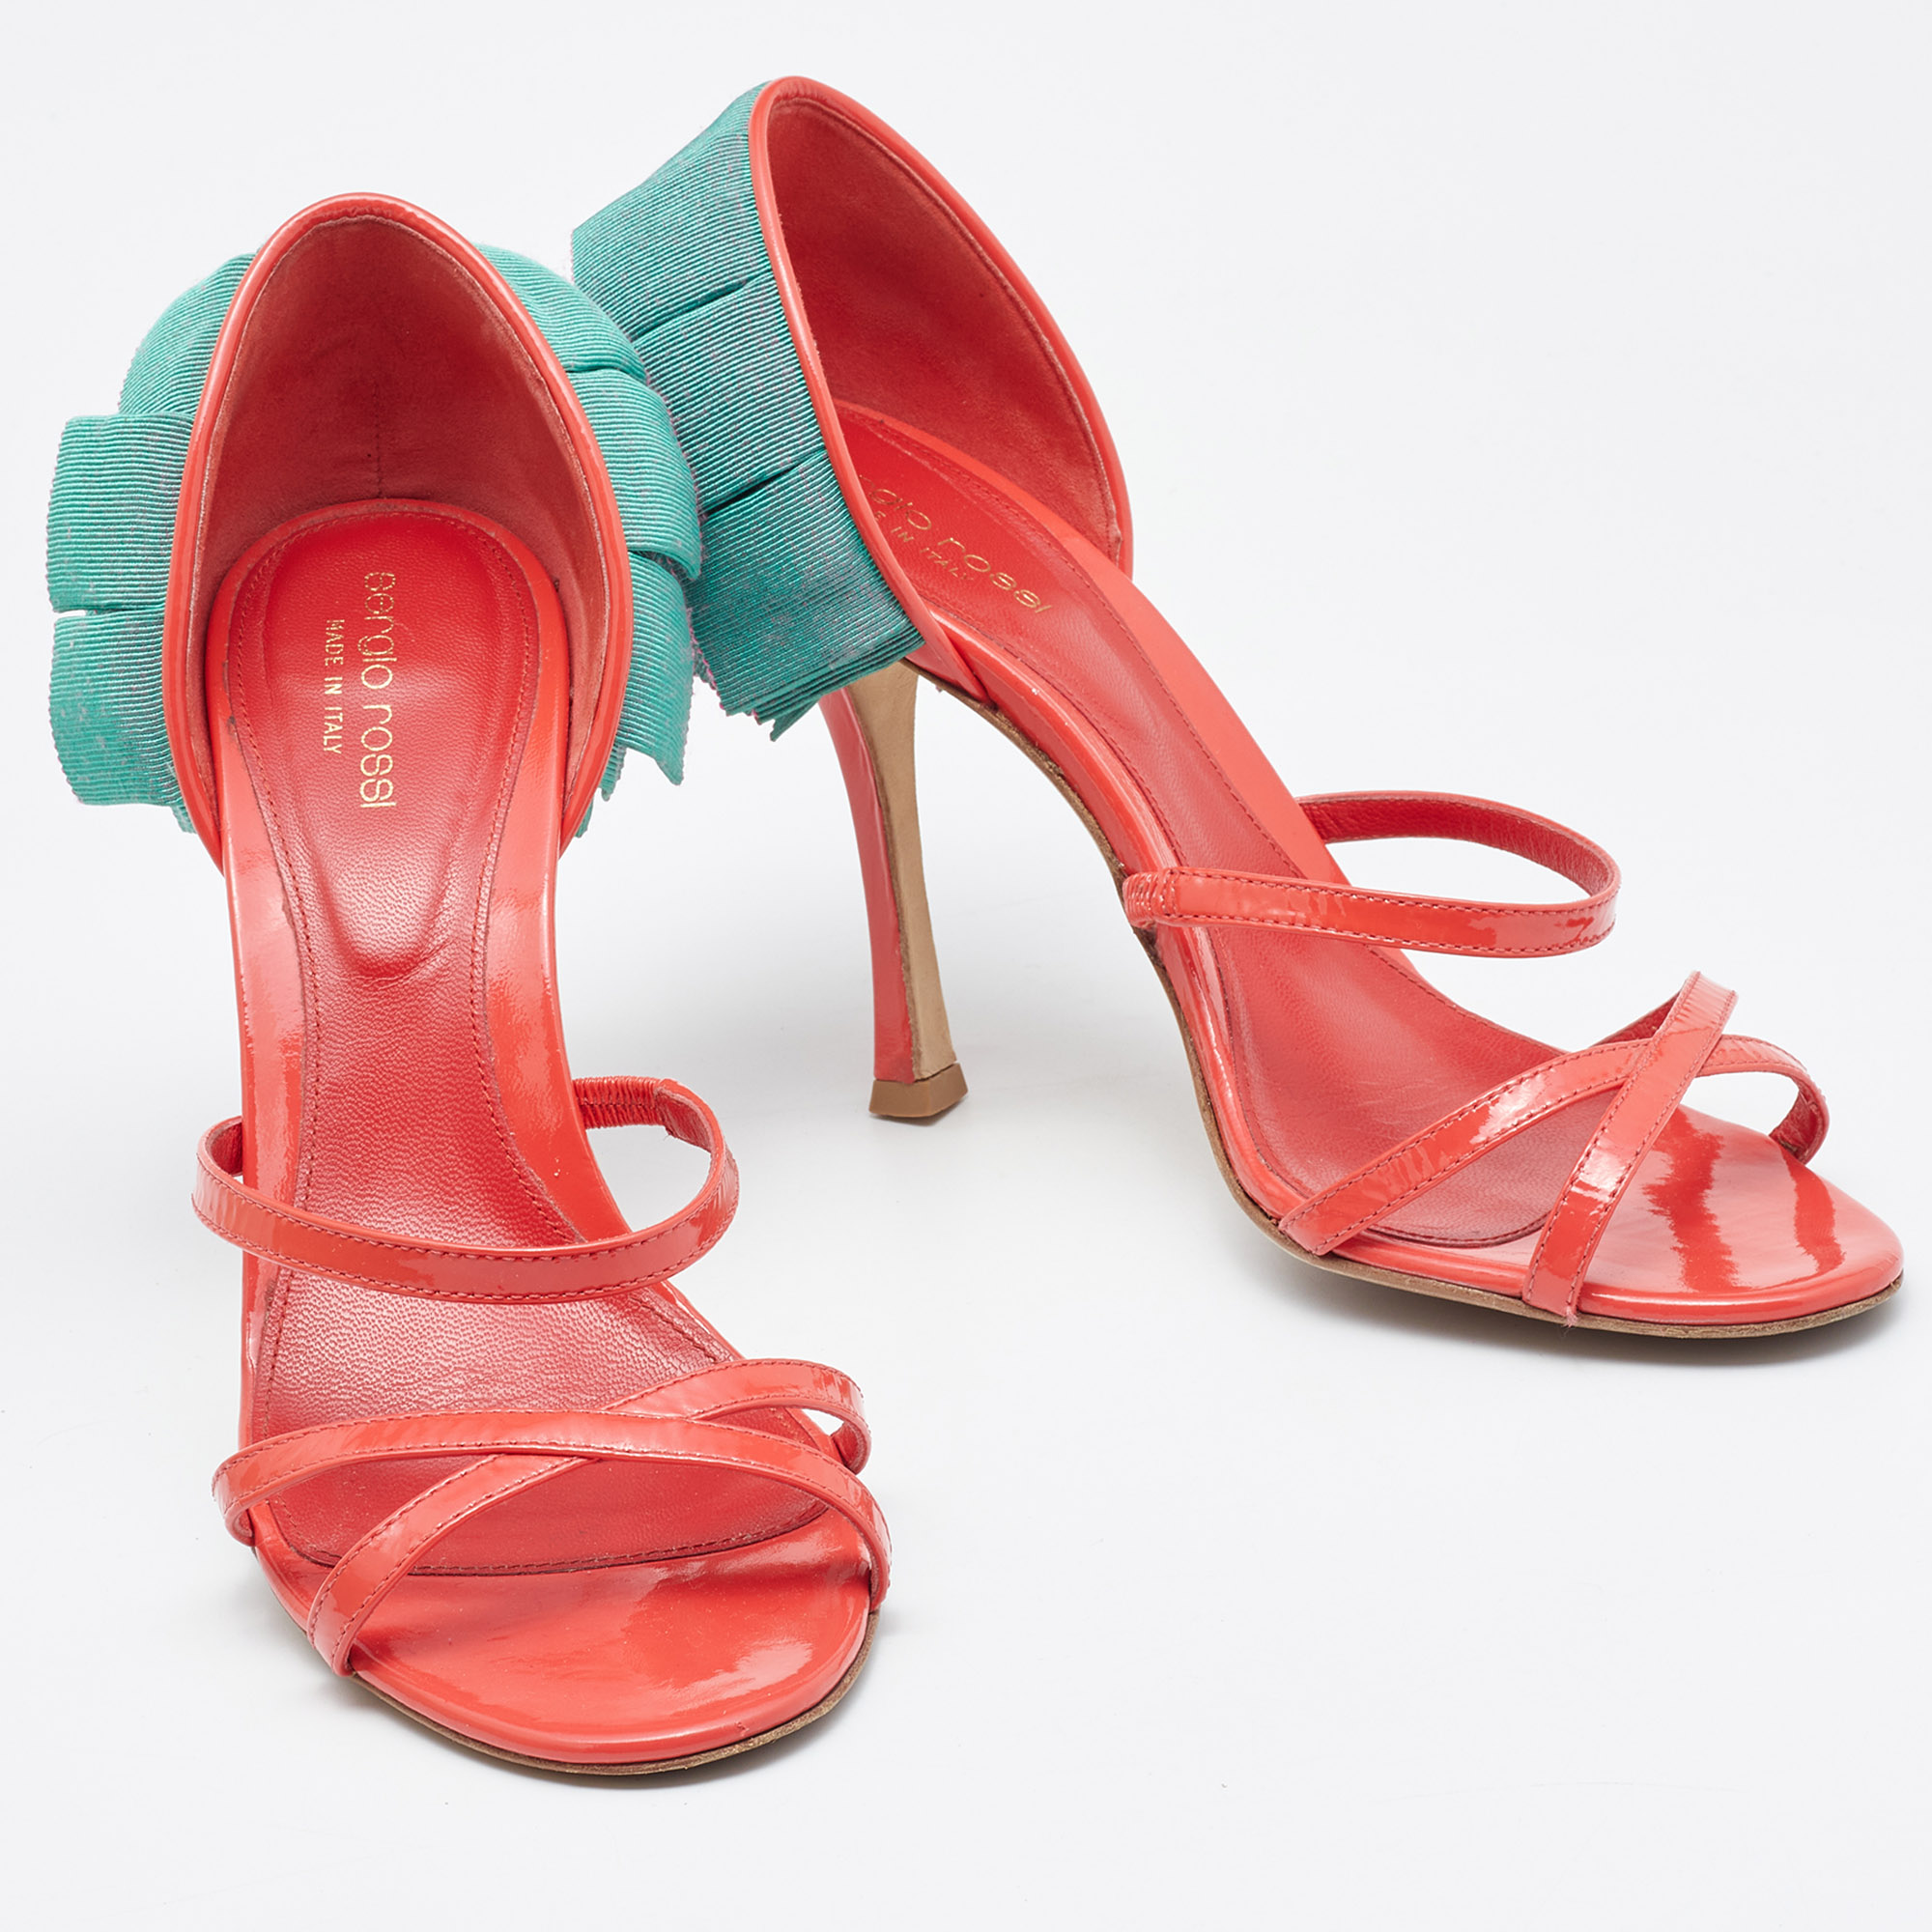 Sergio Rossi Coral/Green Patent Leather Strappy Sandals Size 39